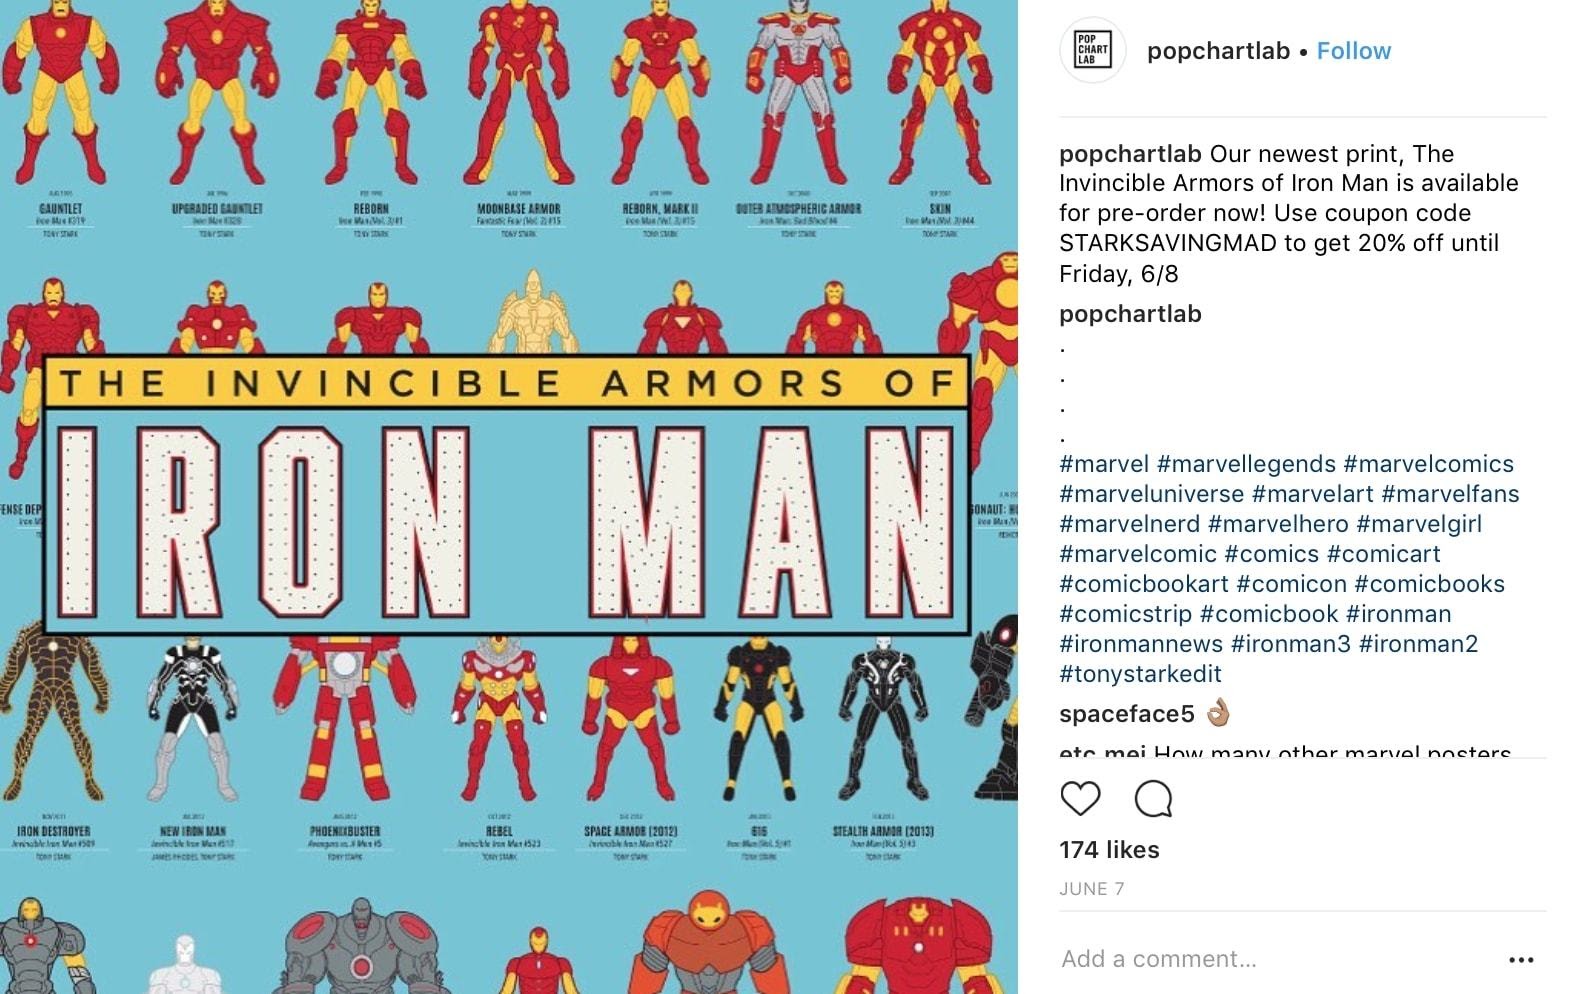 Instagram announcement idea from PopStartLabs showing its newest Ironman poster